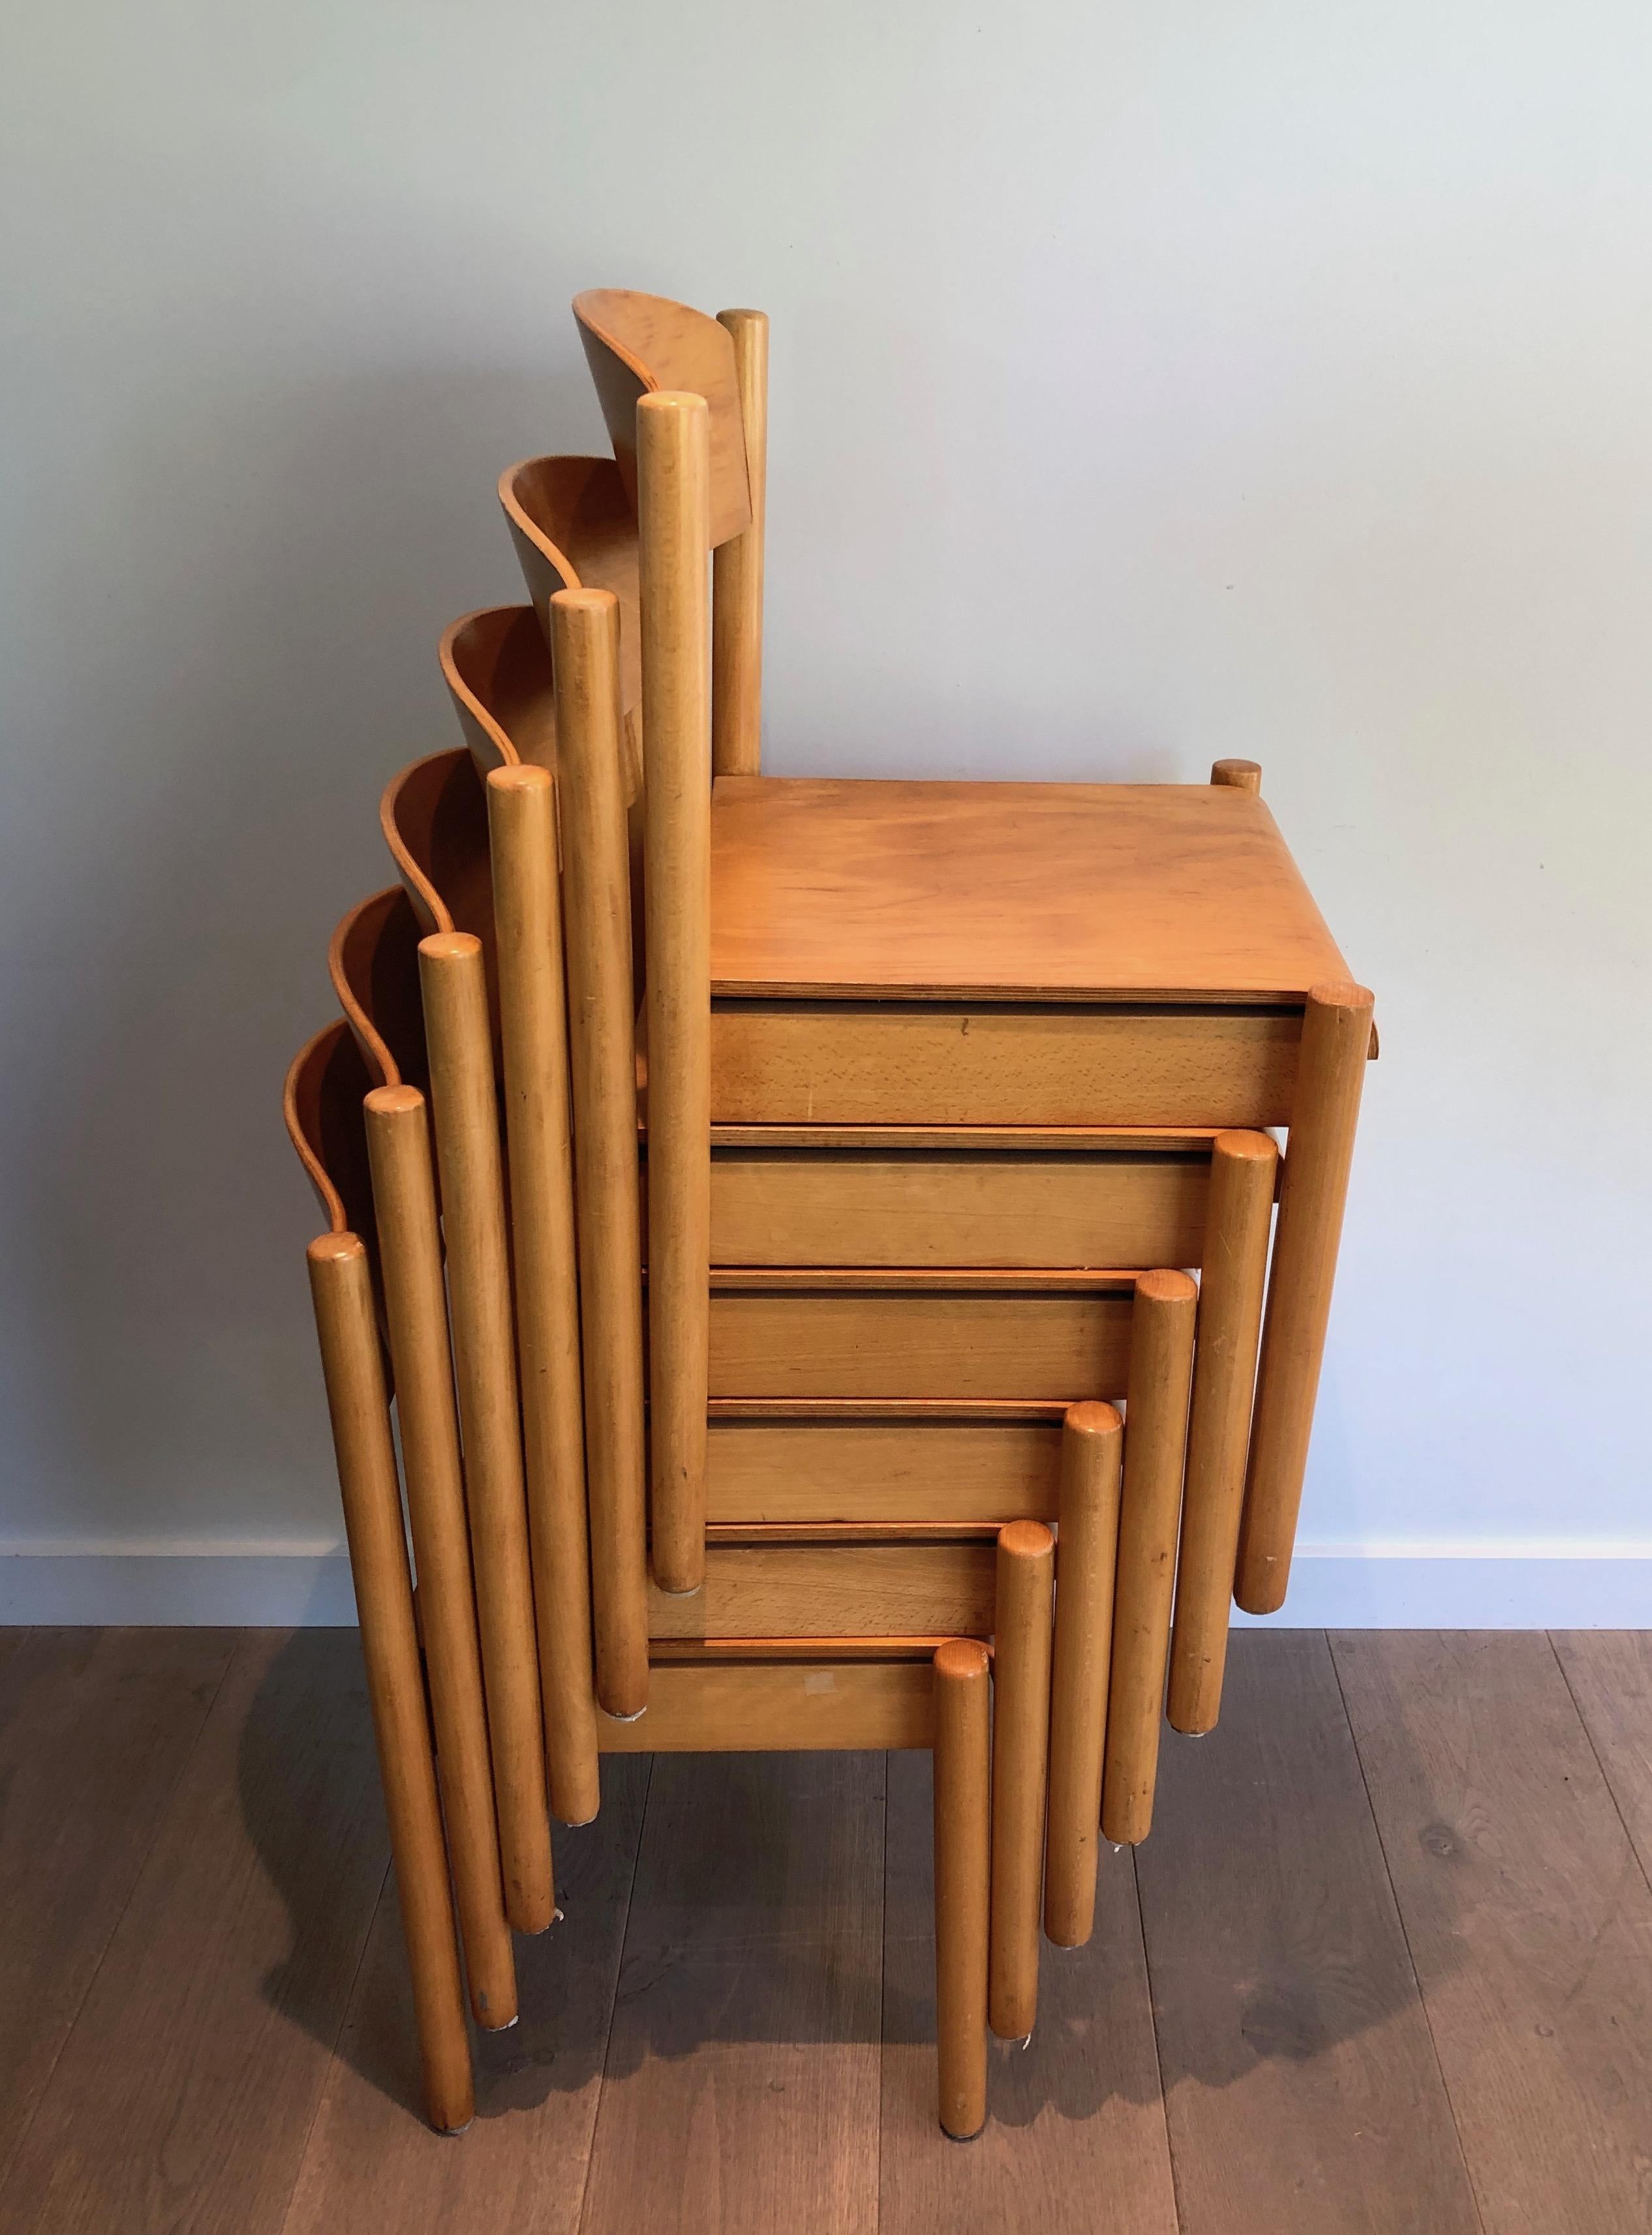 French Set of 6 Stackable Pine Chairs, German Work by Karl Klipper, Circa 1970 For Sale